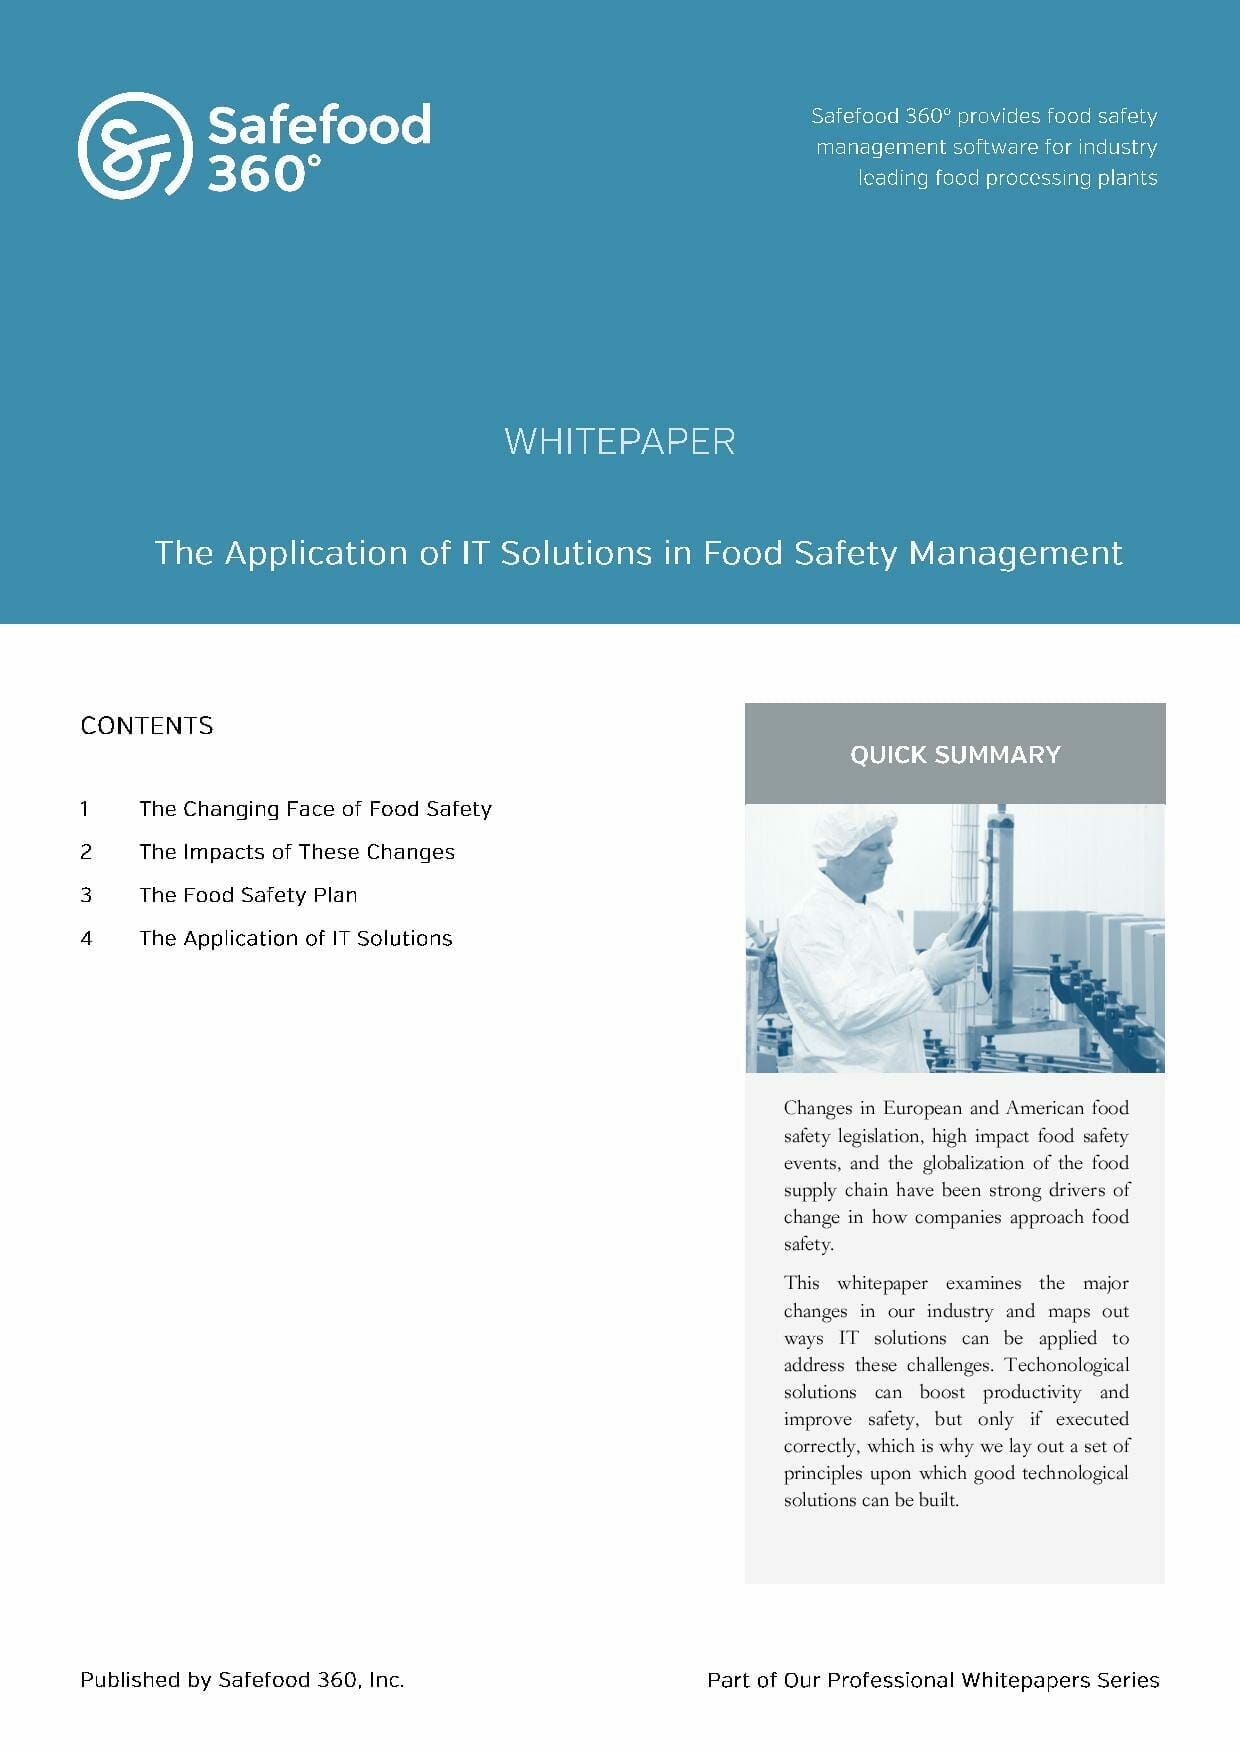 Application of IT solutions in Food Safety Management